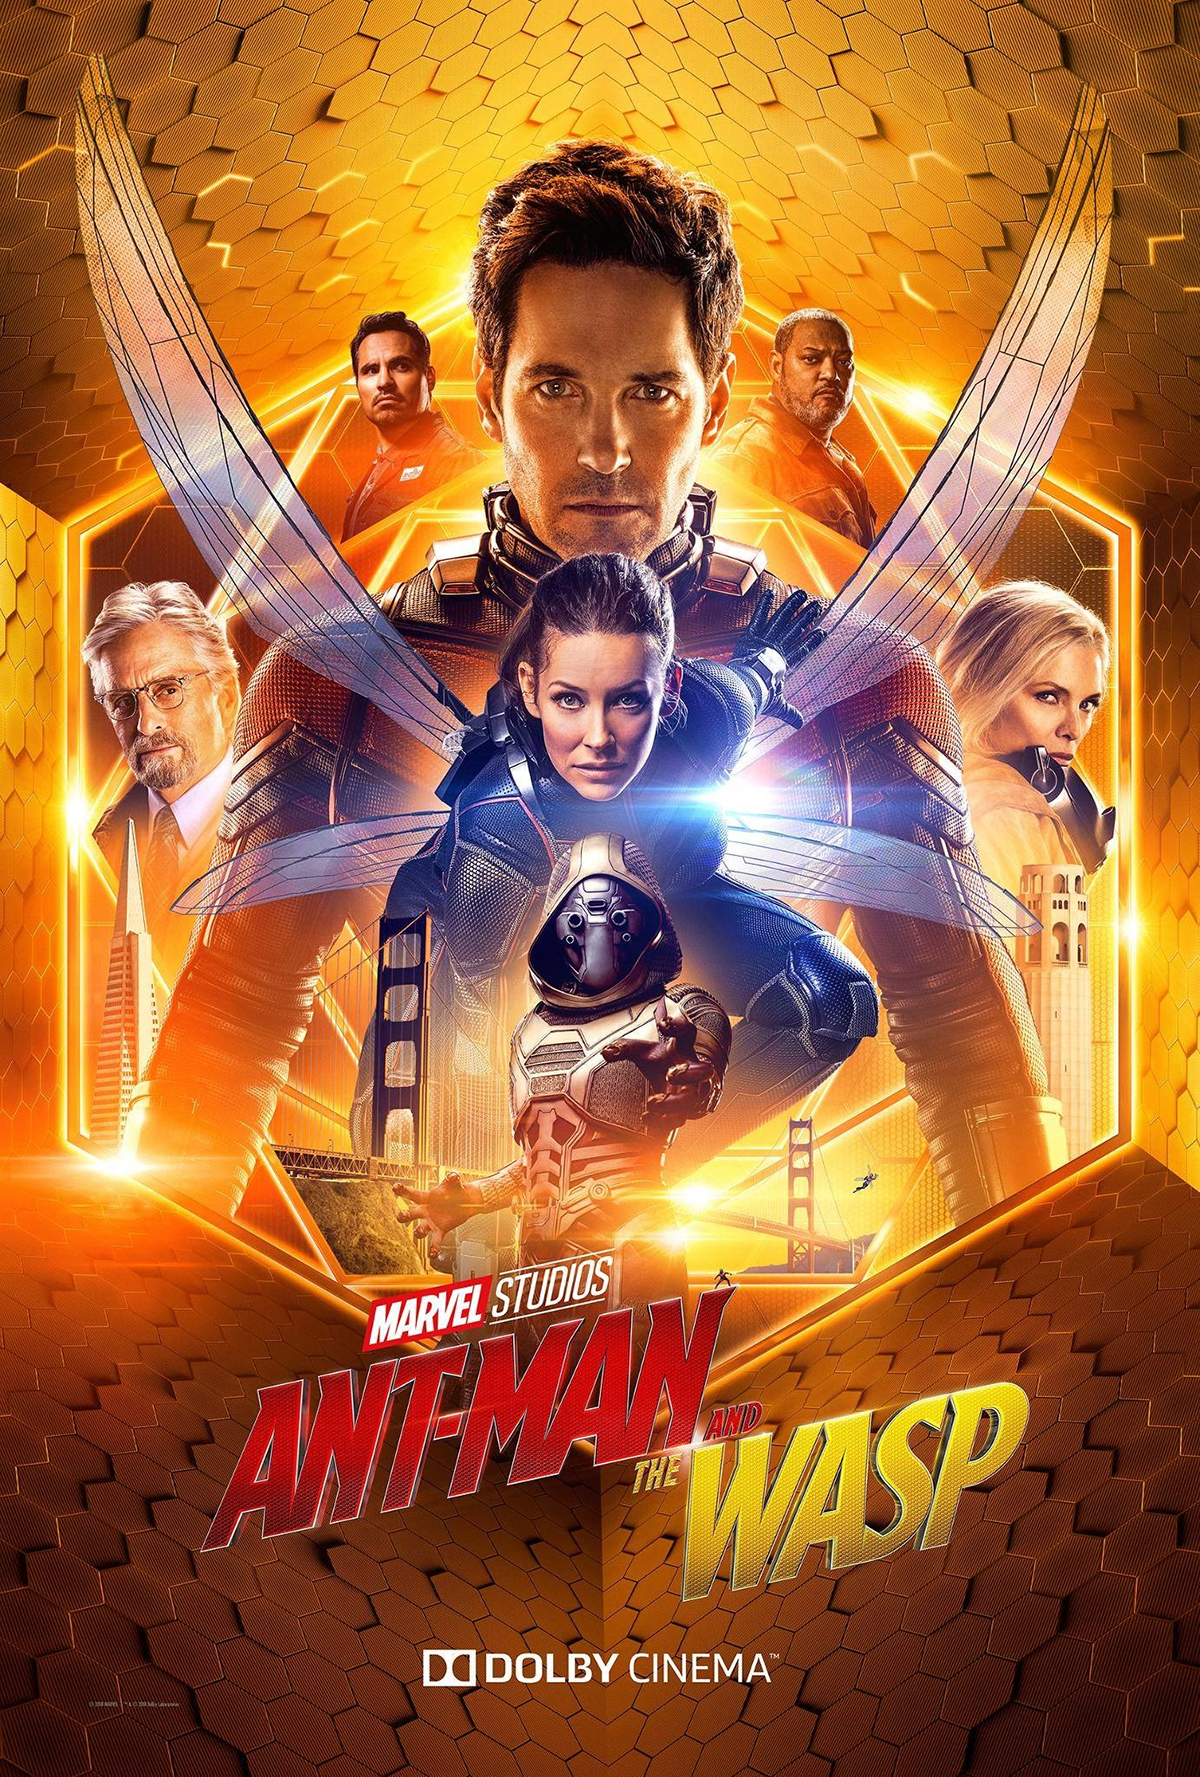 movie-breakdown-ant-man-and-the-wasp-side-one-track-one